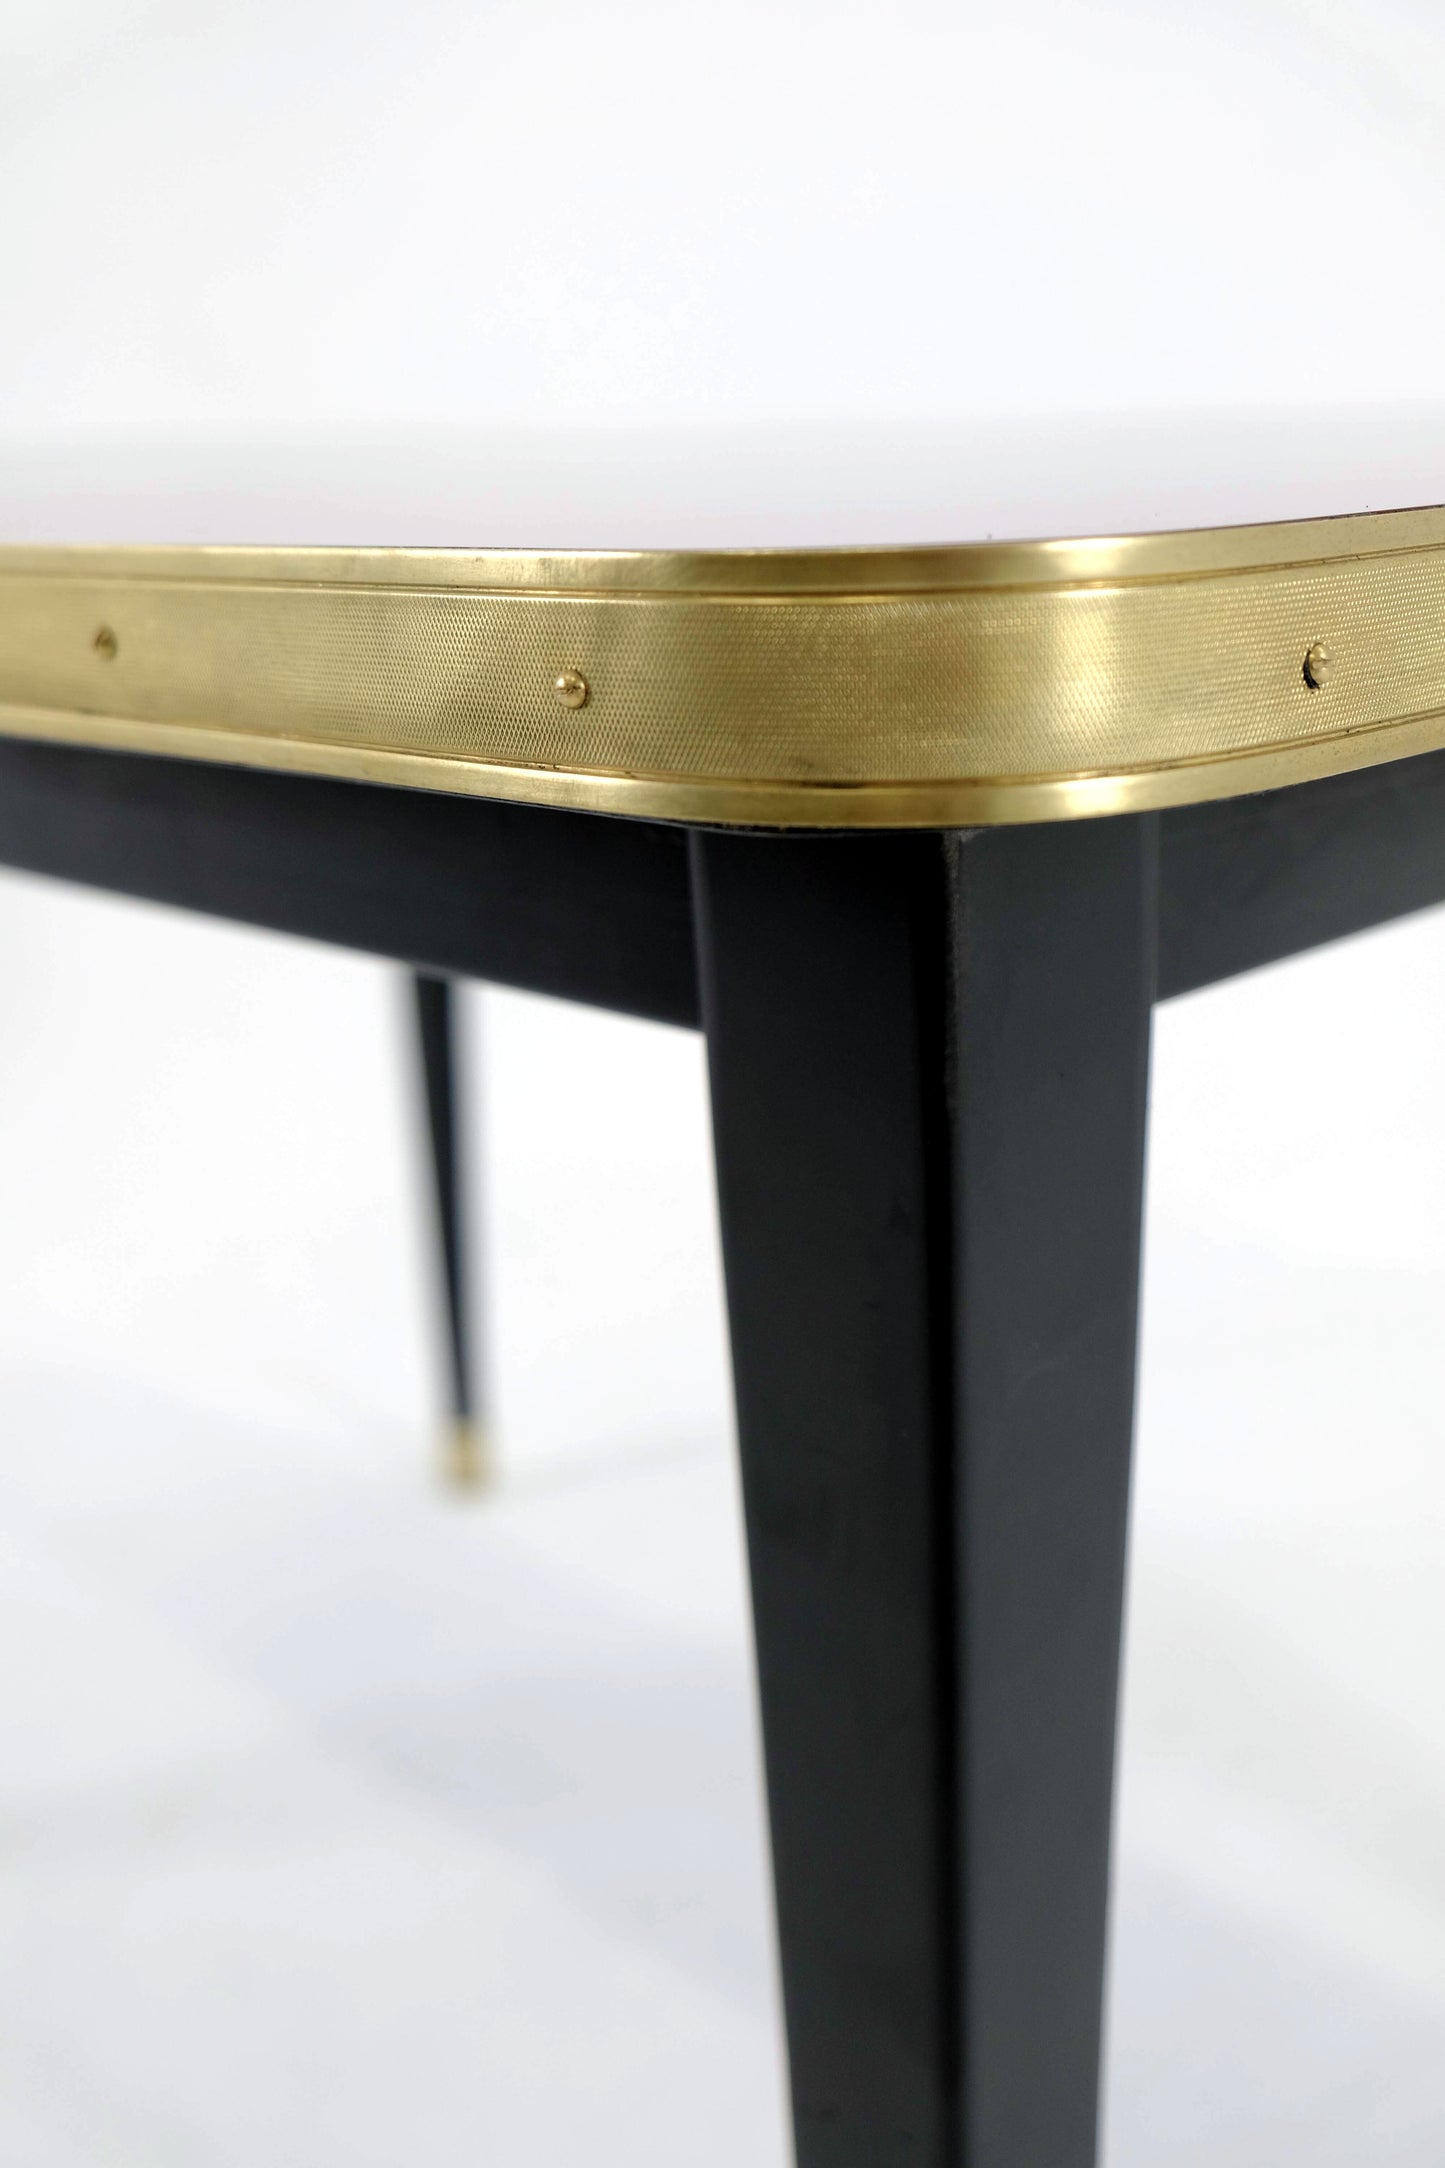 Customized Conference Room Tables & Office Desk Tables, Handcrafted in Spain